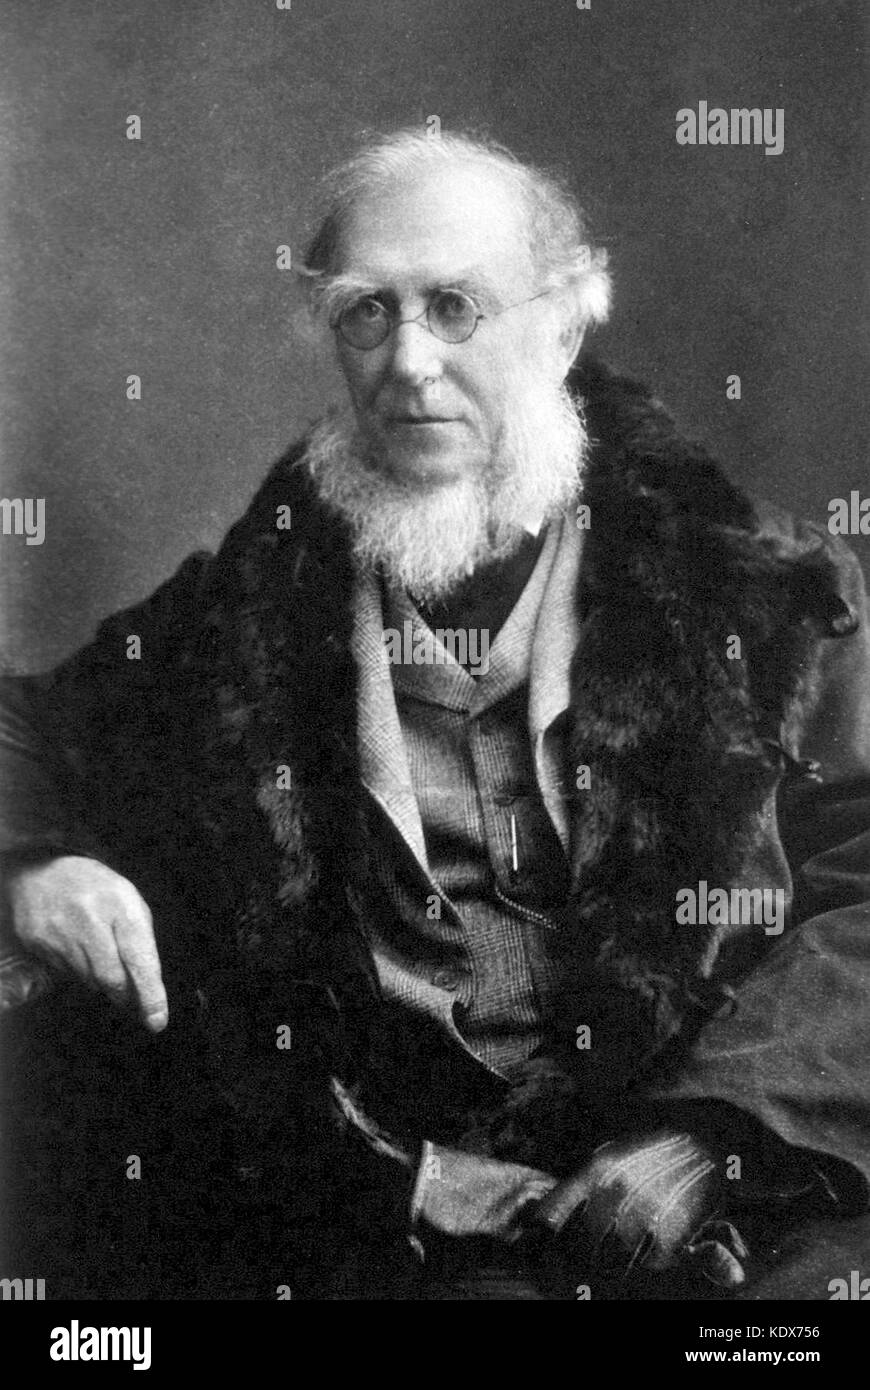 Sir Joseph Dalton Hooker, one of the greatest British botanists and explorers of the 19th century. Stock Photo